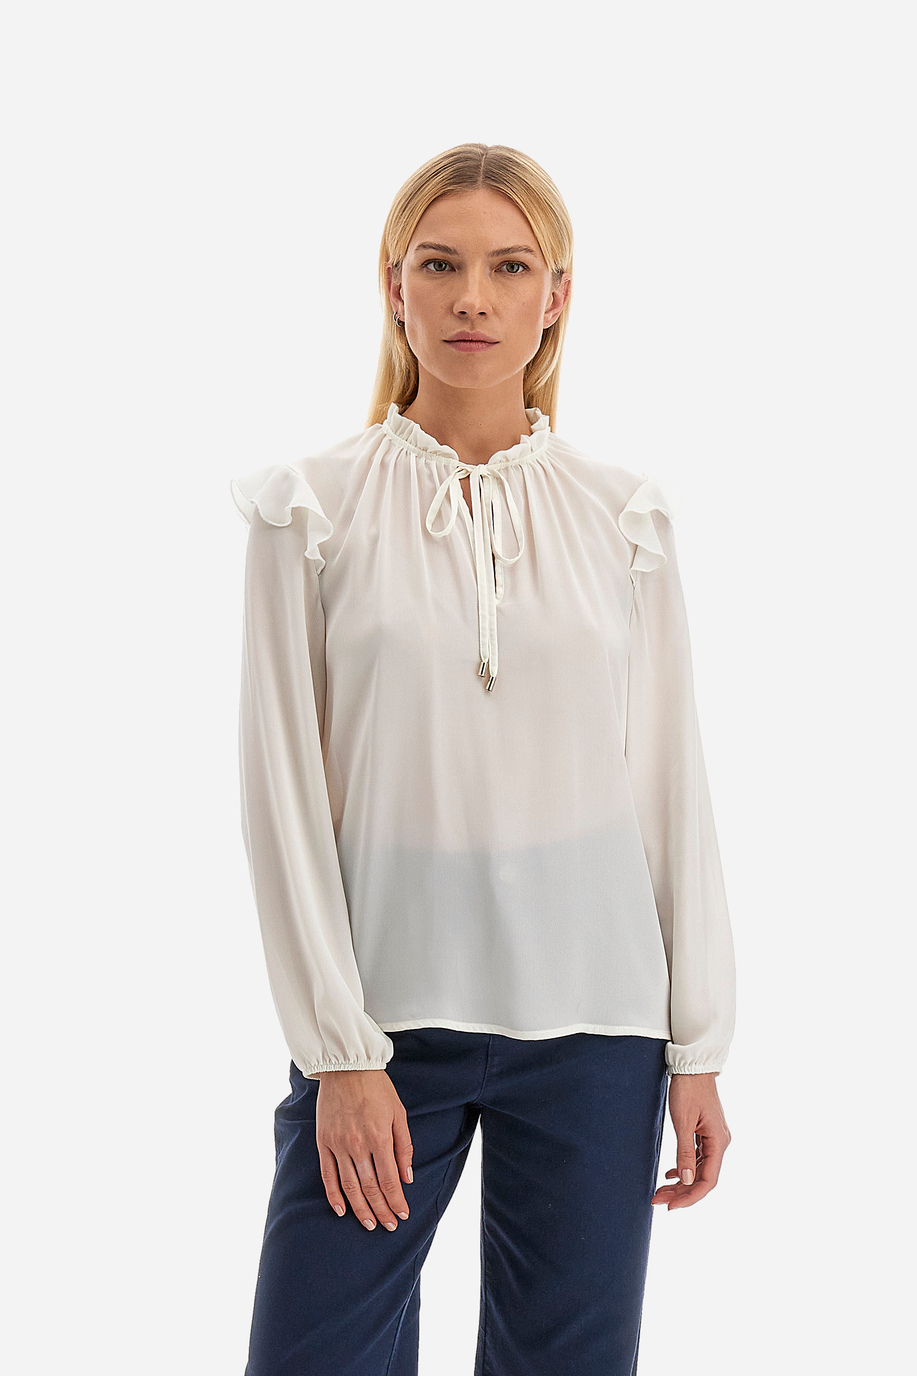 Women's long-sleeved shirt in solid color and georgette fabric Spring Weekend - Ville - Preview | La Martina - Official Online Shop